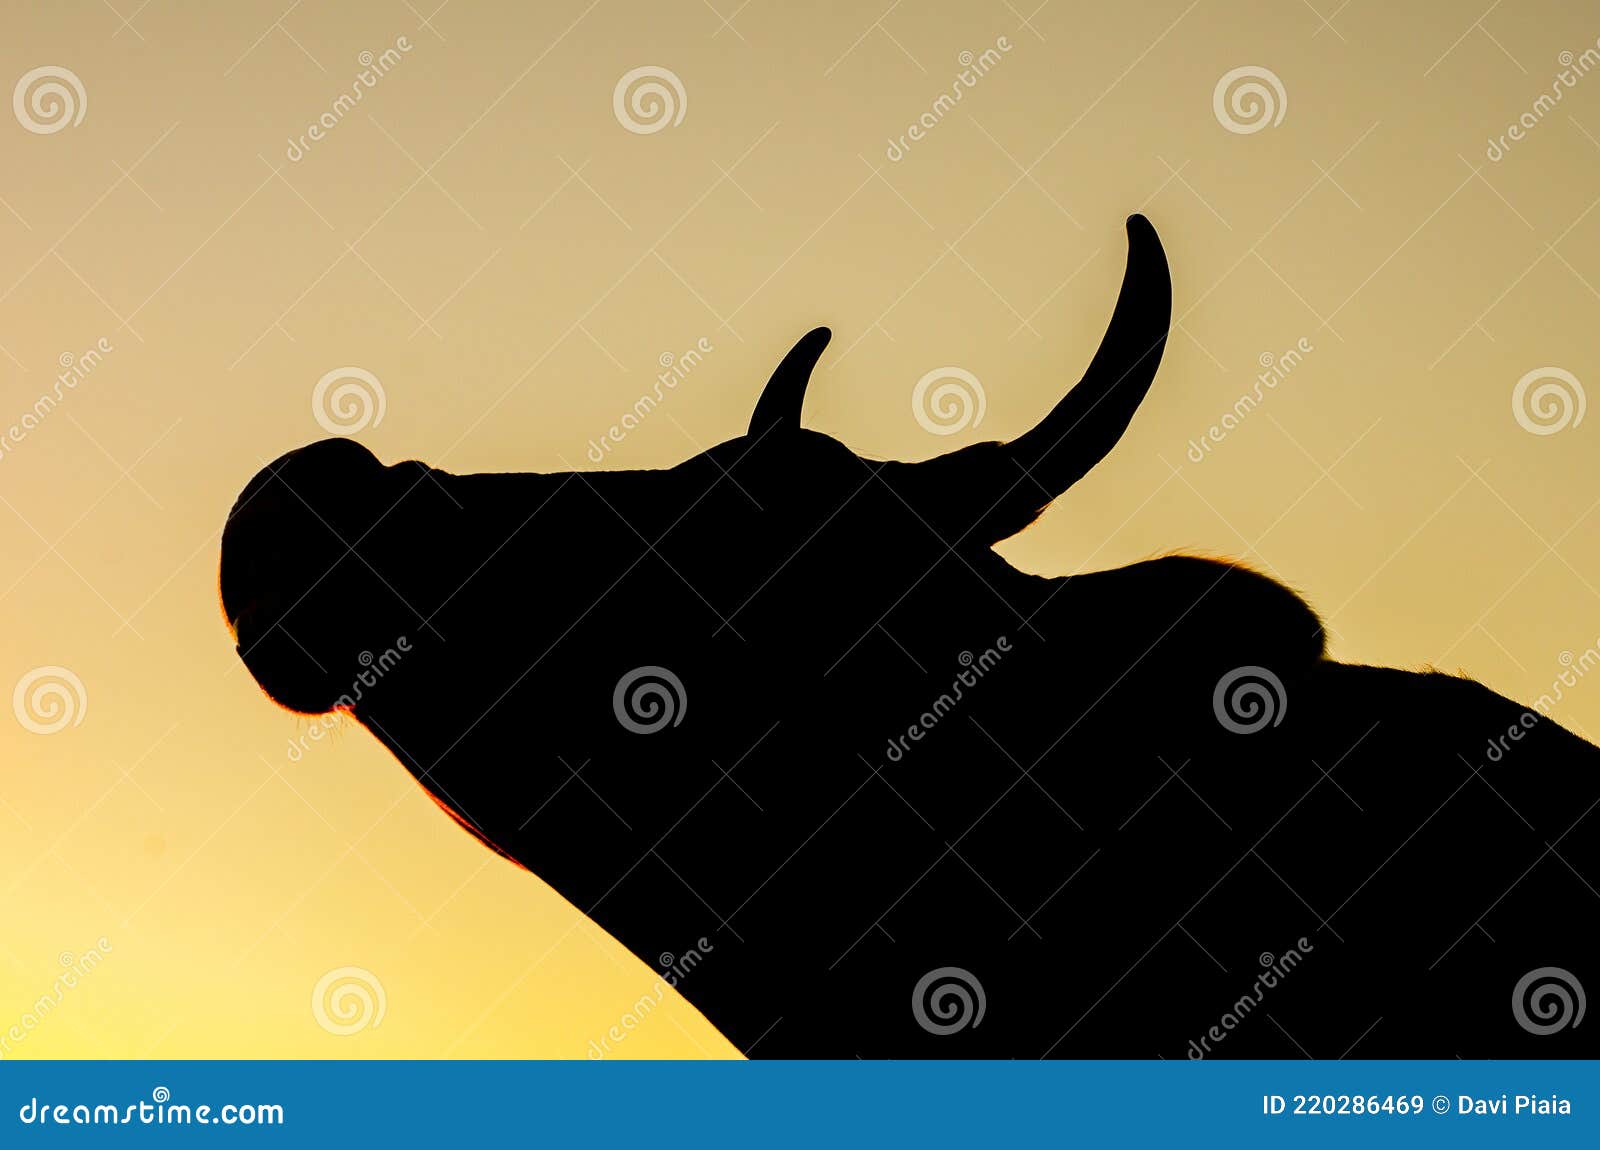 image dairy cattle at sunset